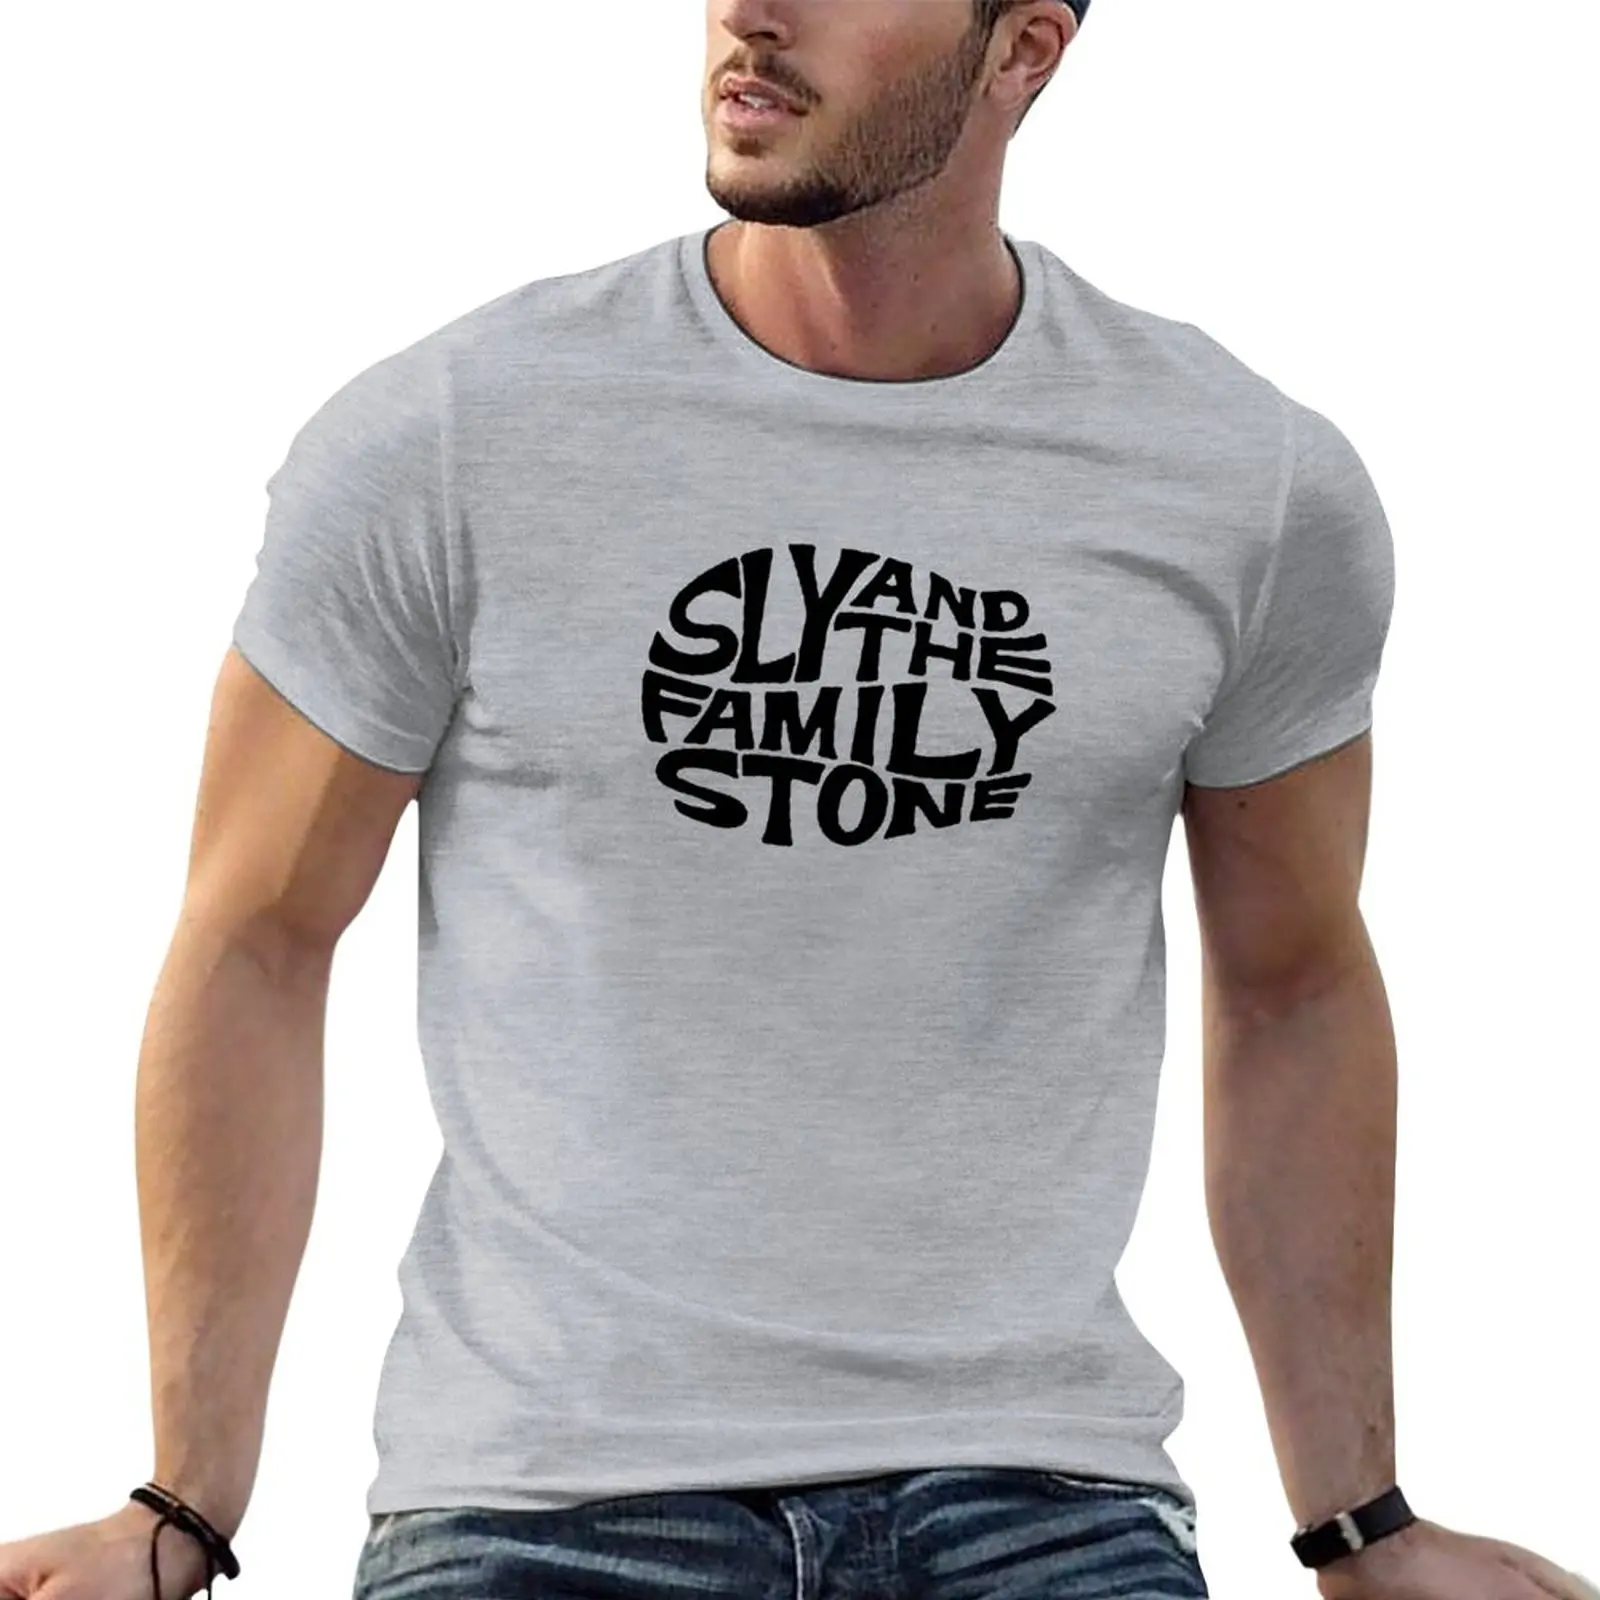 New Sly and the Family Stone T-Shirt summer tops cute tops shirts graphic tees black t-shirts for men men t shirt 1981 vintage 40th birthday manga pure cotton tees music tech graphic t shirts round collar tops plus size